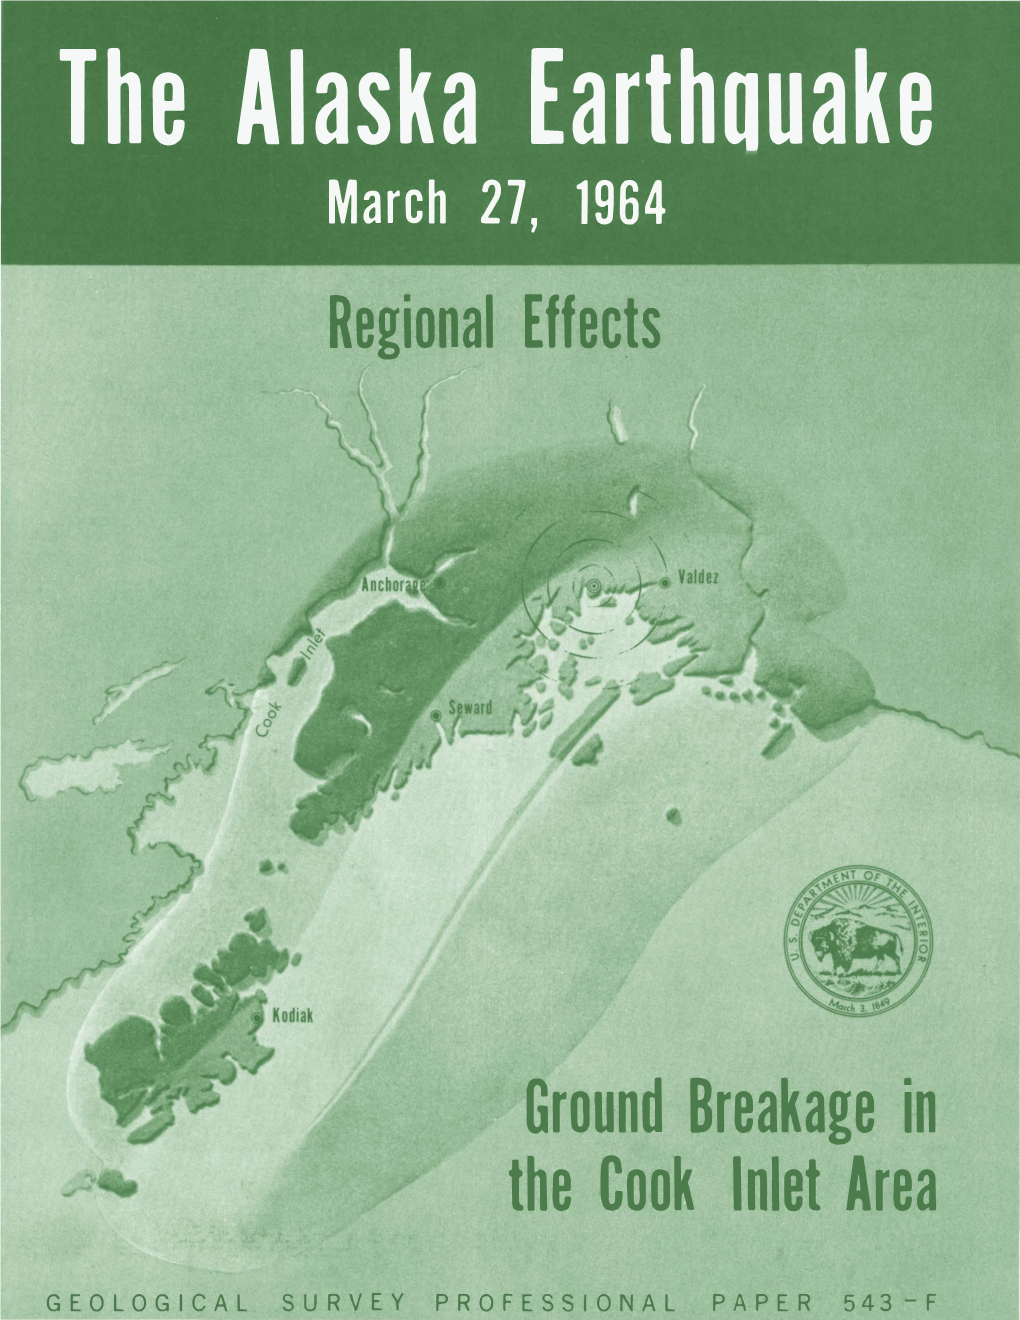 USGS Professional Paper 543-F, Text